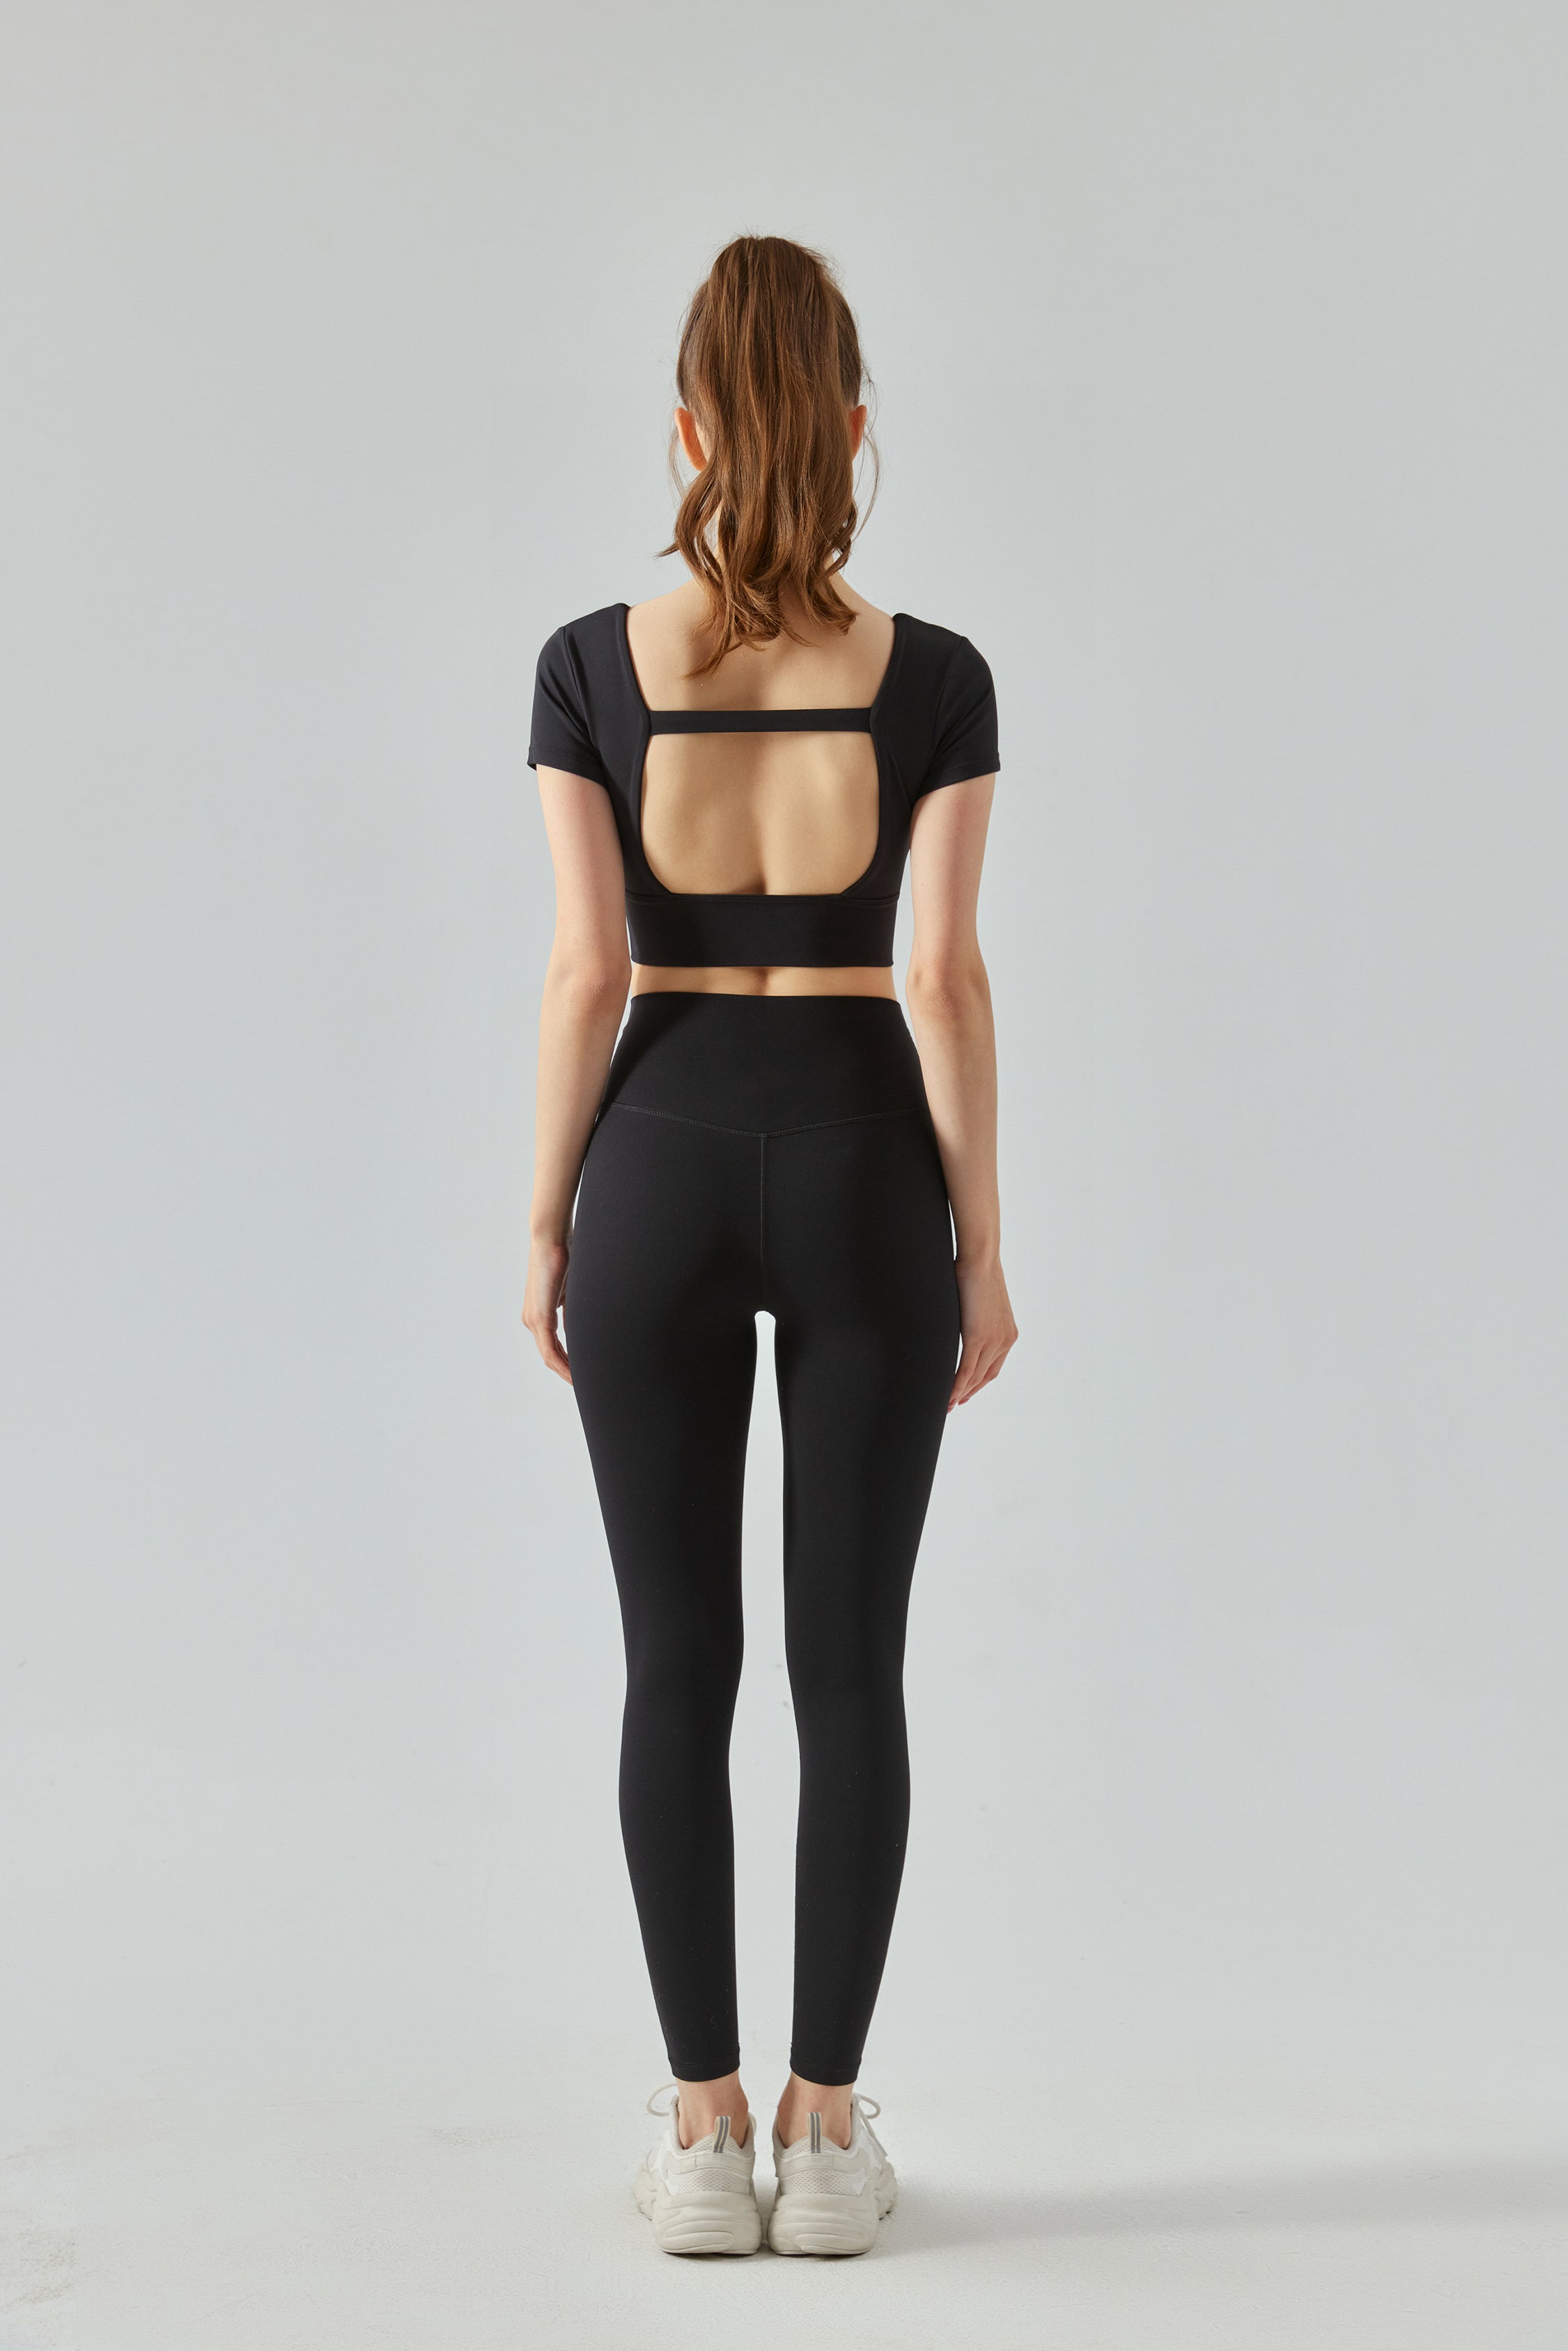 Seamless-Open-Back-Crop-Top-with-Built-in-Bra-Black